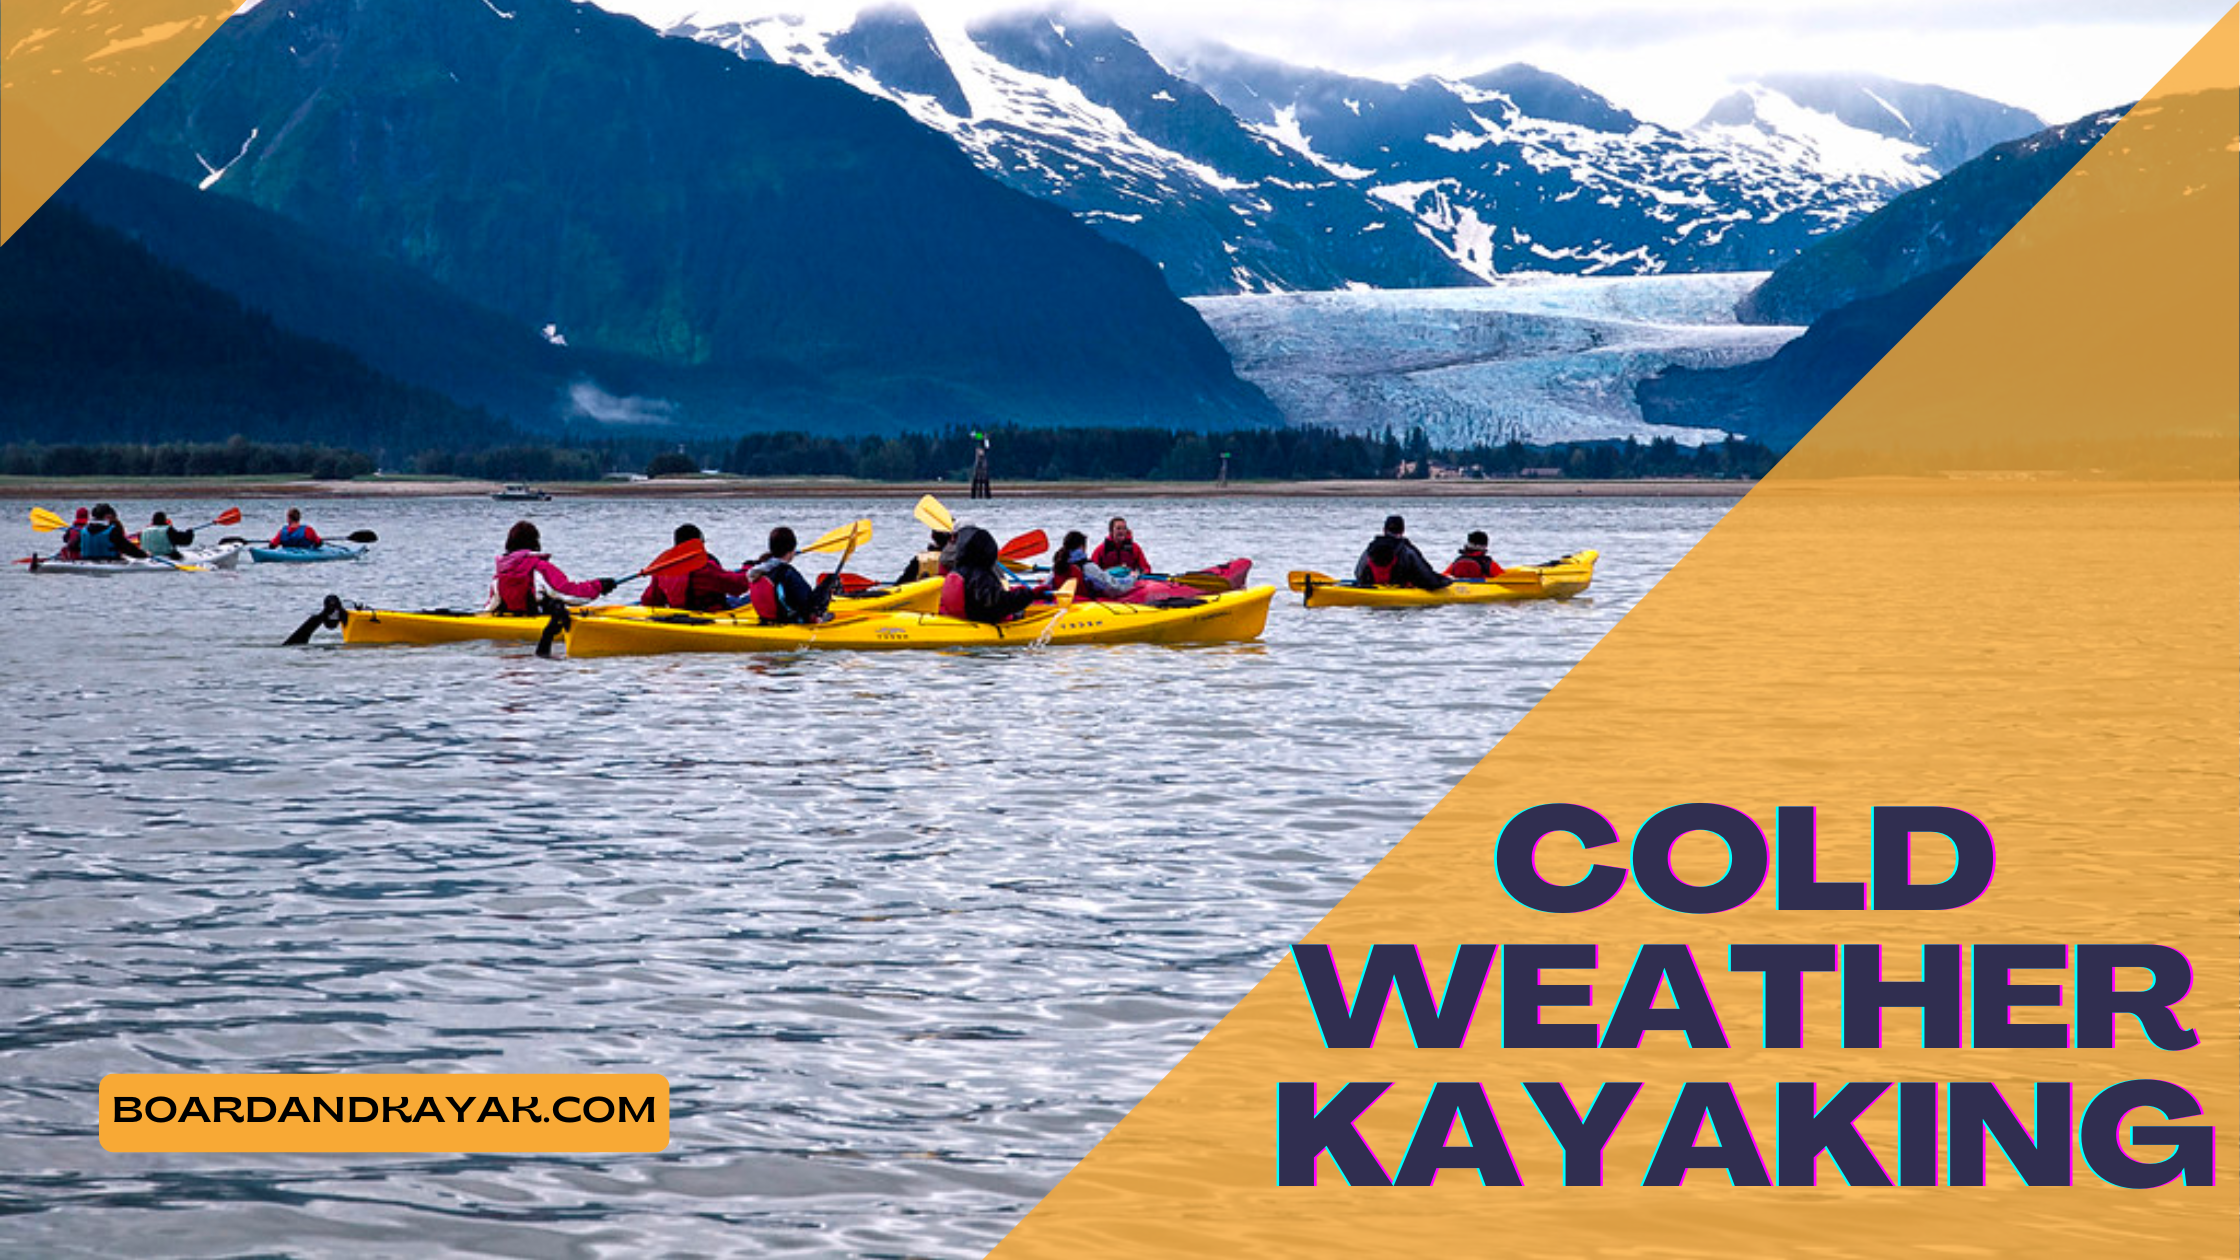 What to wear kayaking in cold weather?